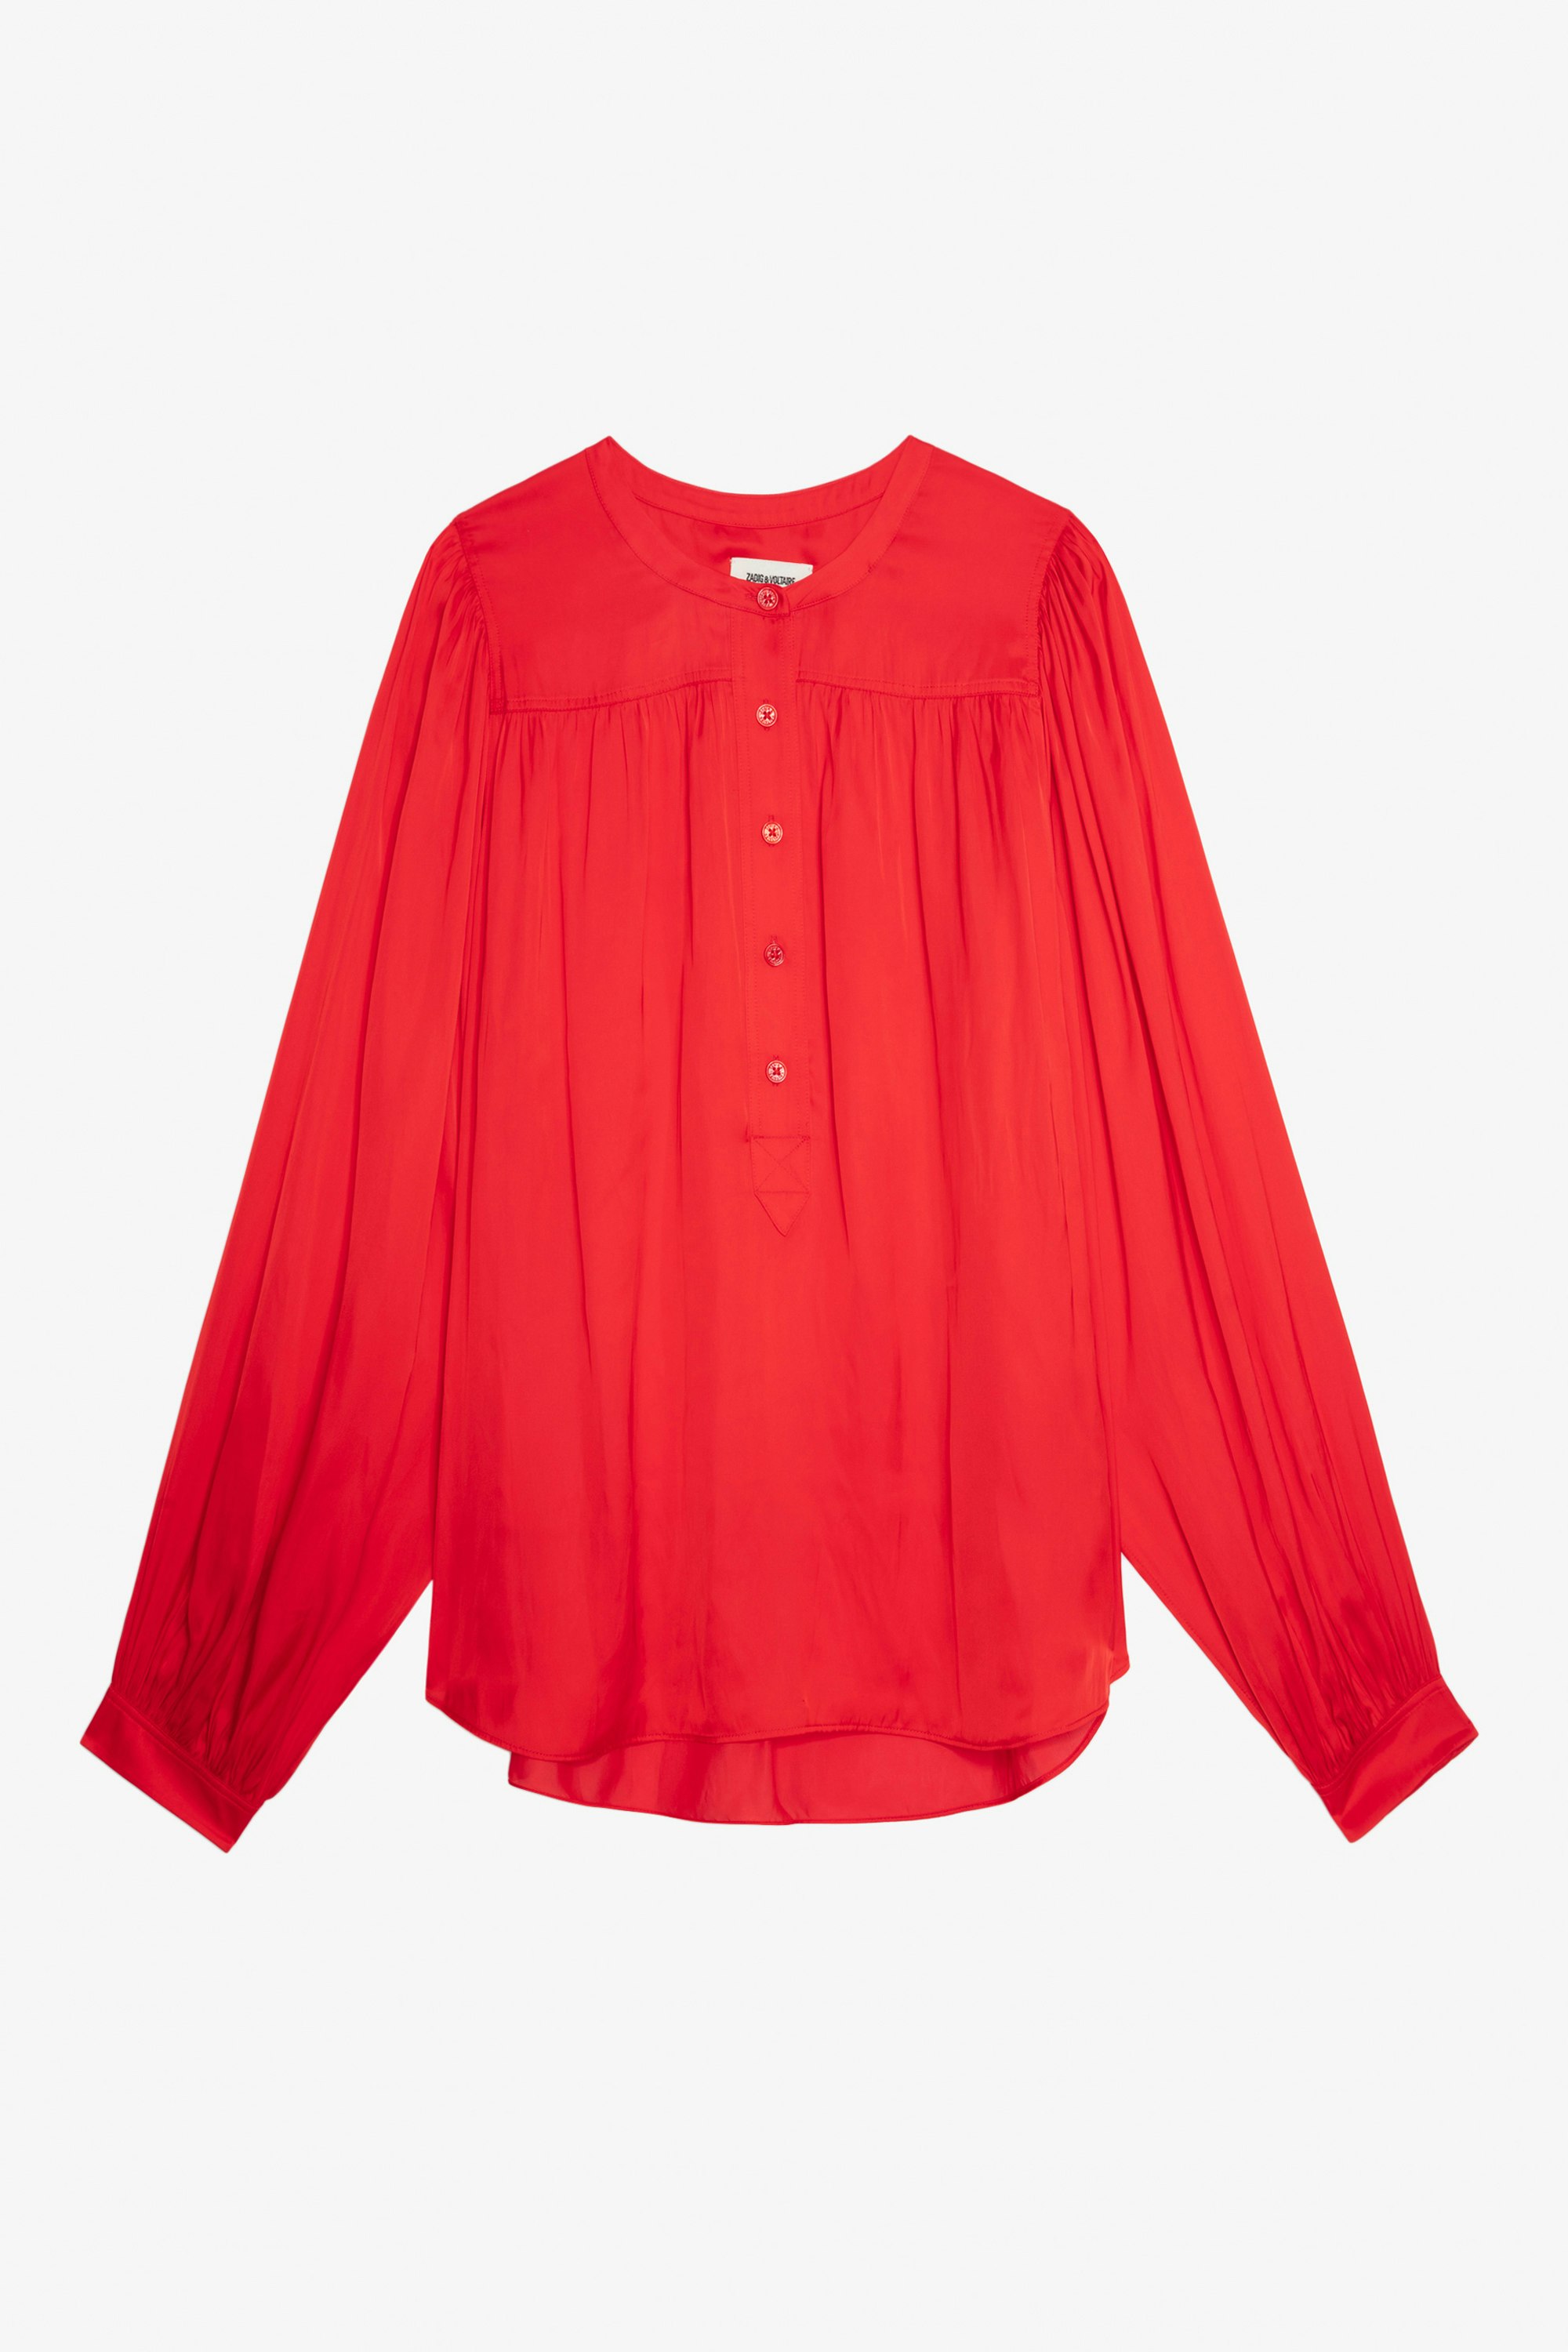 Tigy Satin Blouse - Women’s red satin blouse with gathers and buttons